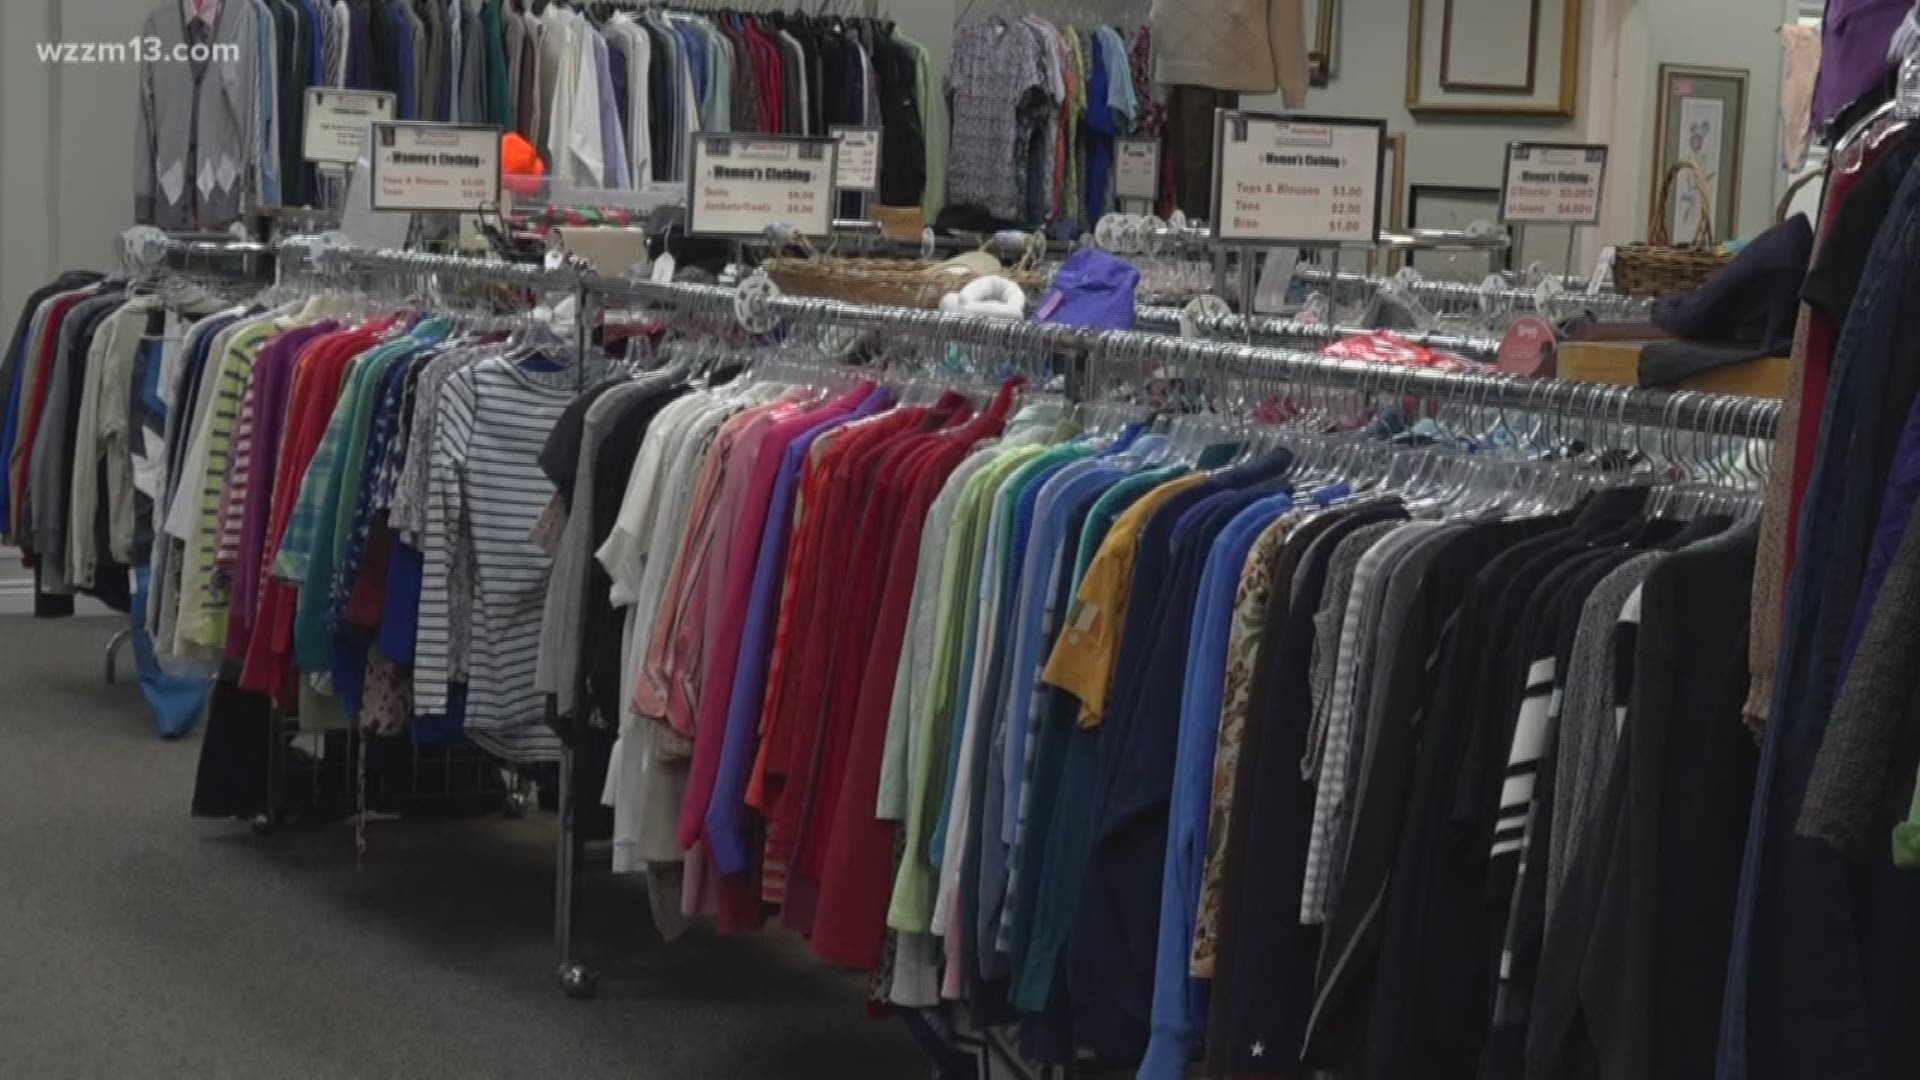 Netflix show leads to deals at thrift stores